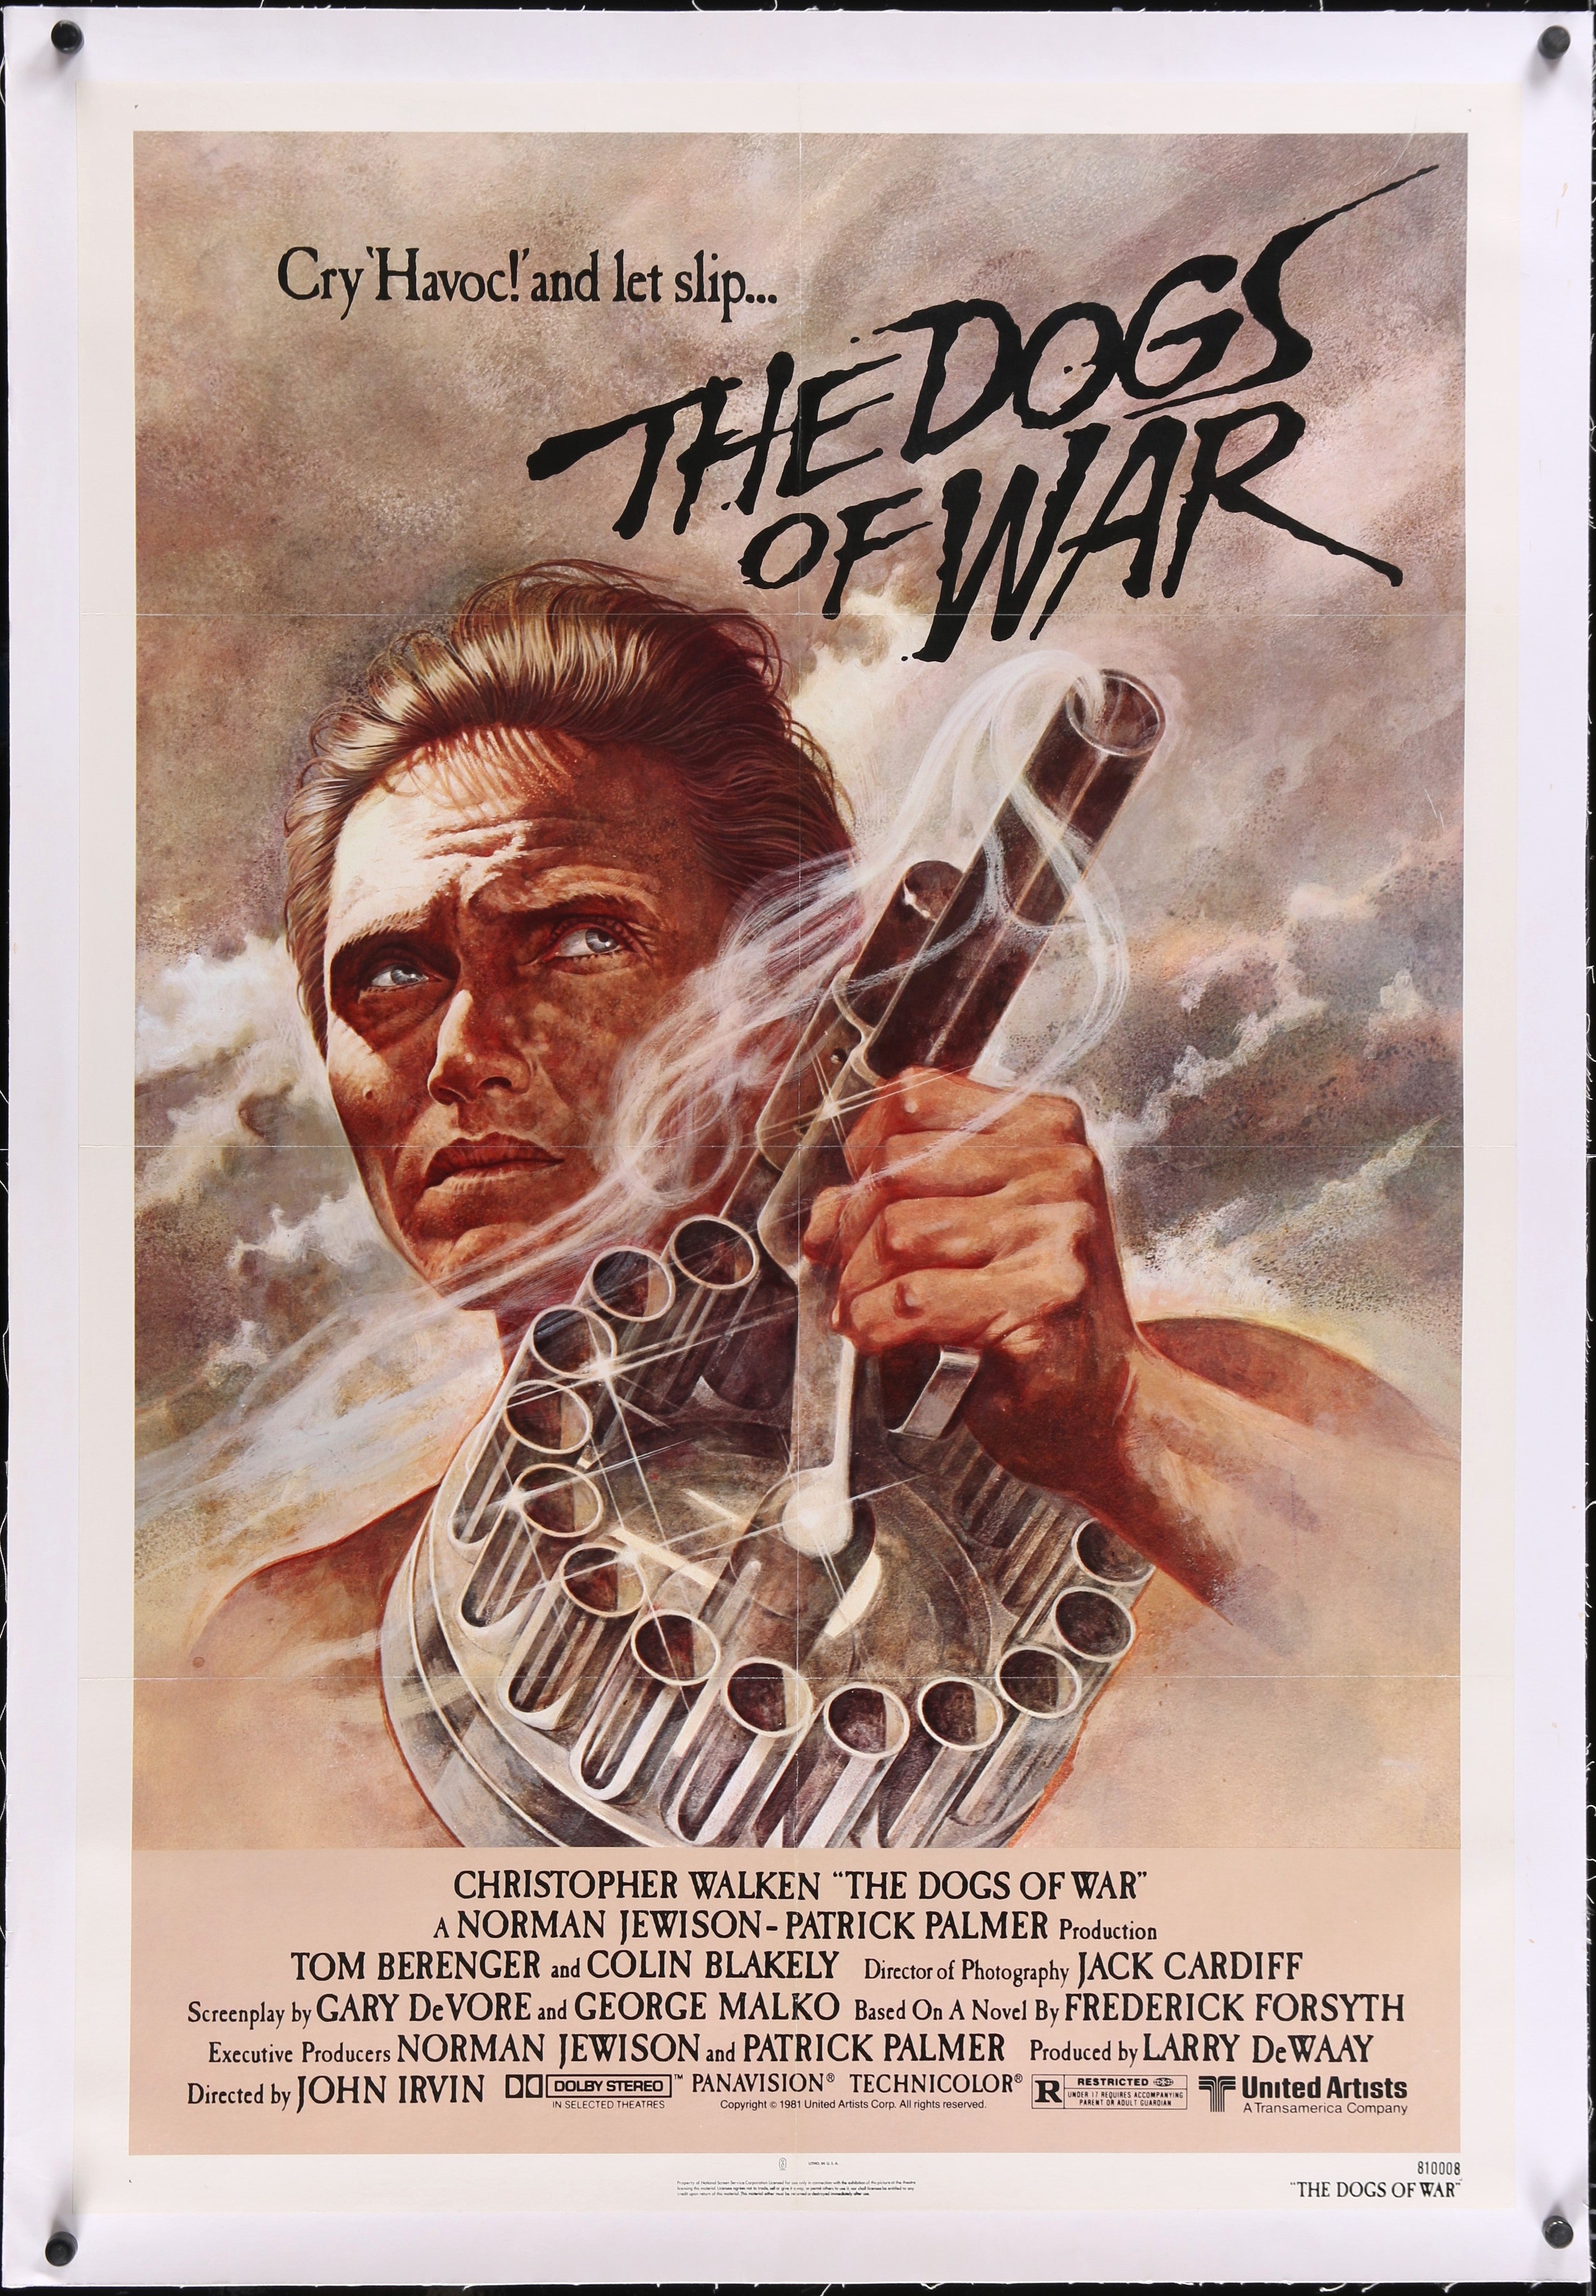 THE DOGS OF WAR (1981)